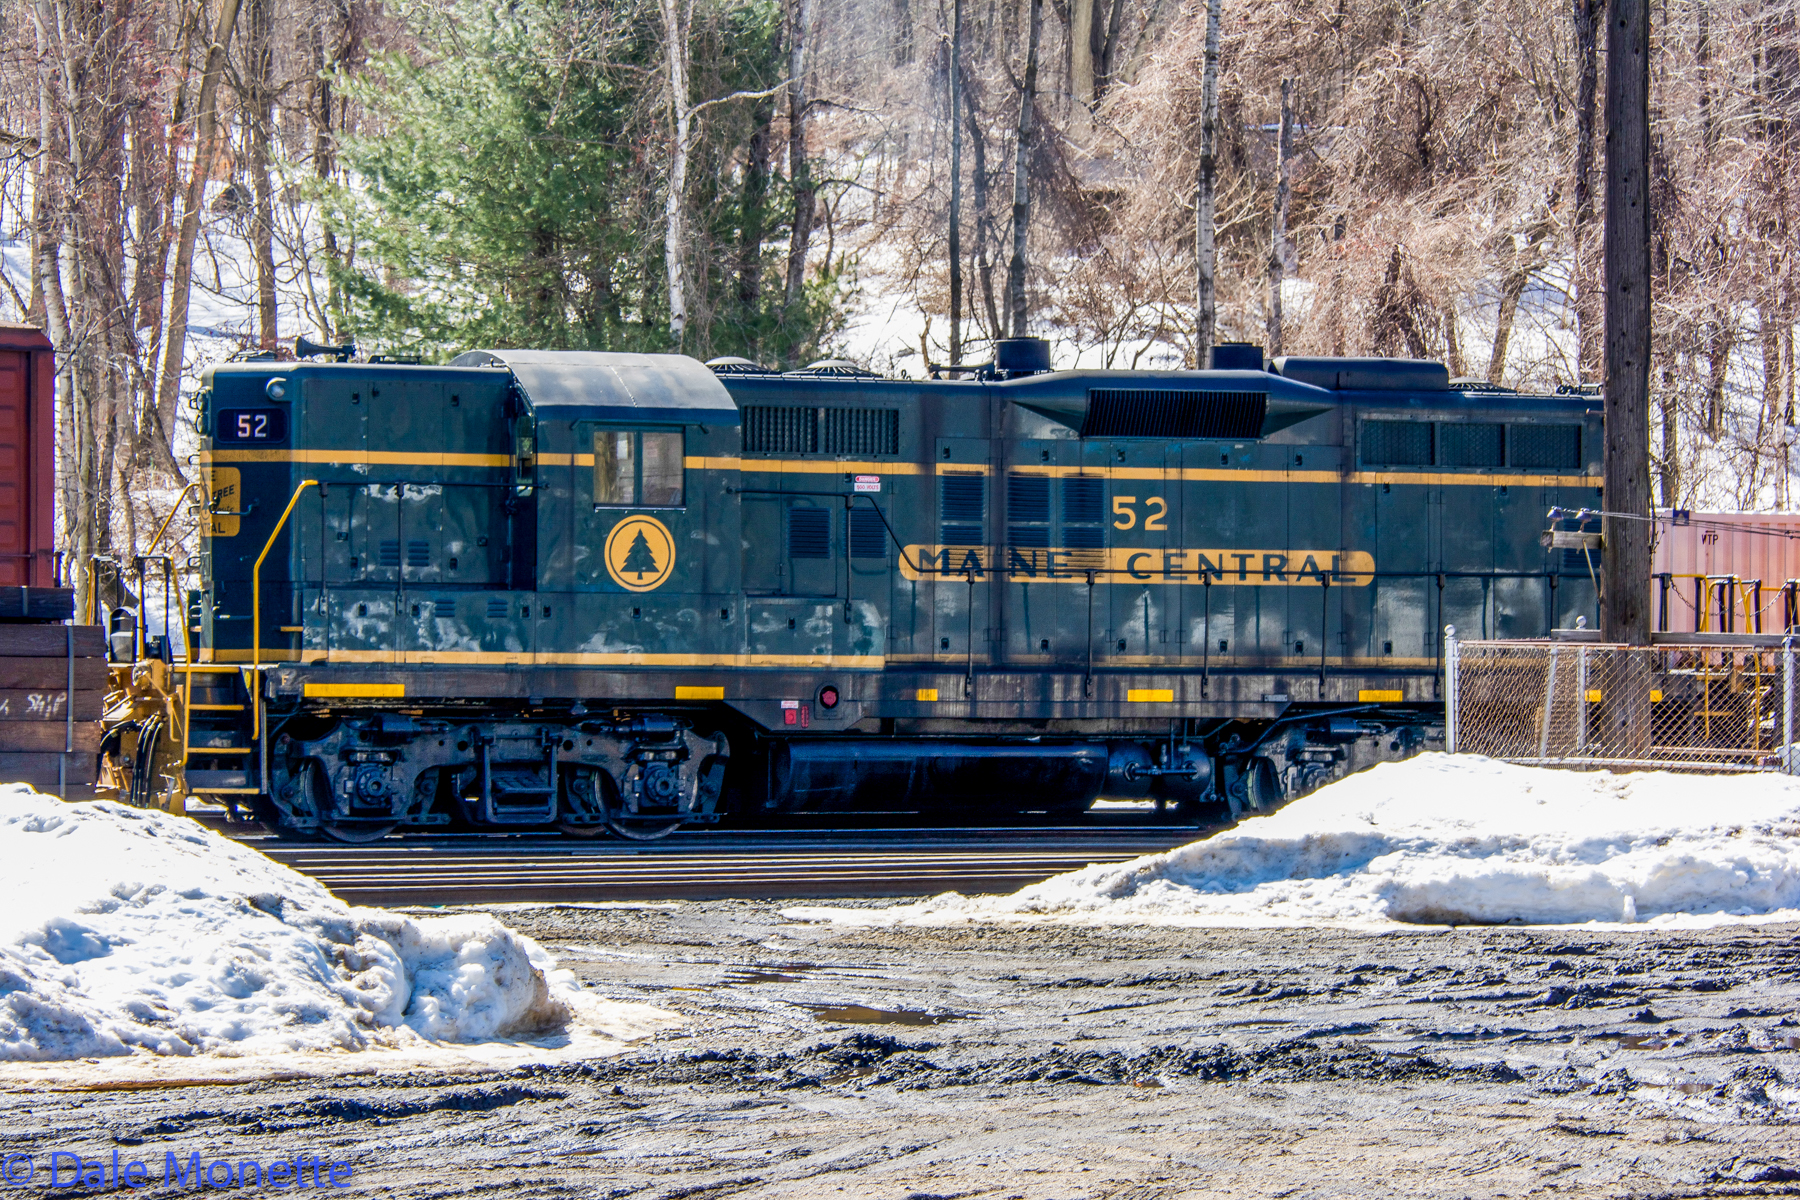   Maine Central Alco working in the East Deerfield&nbsp;Pan Am RR yard. &nbsp;Where this came from I have no idea! 3/12/15  